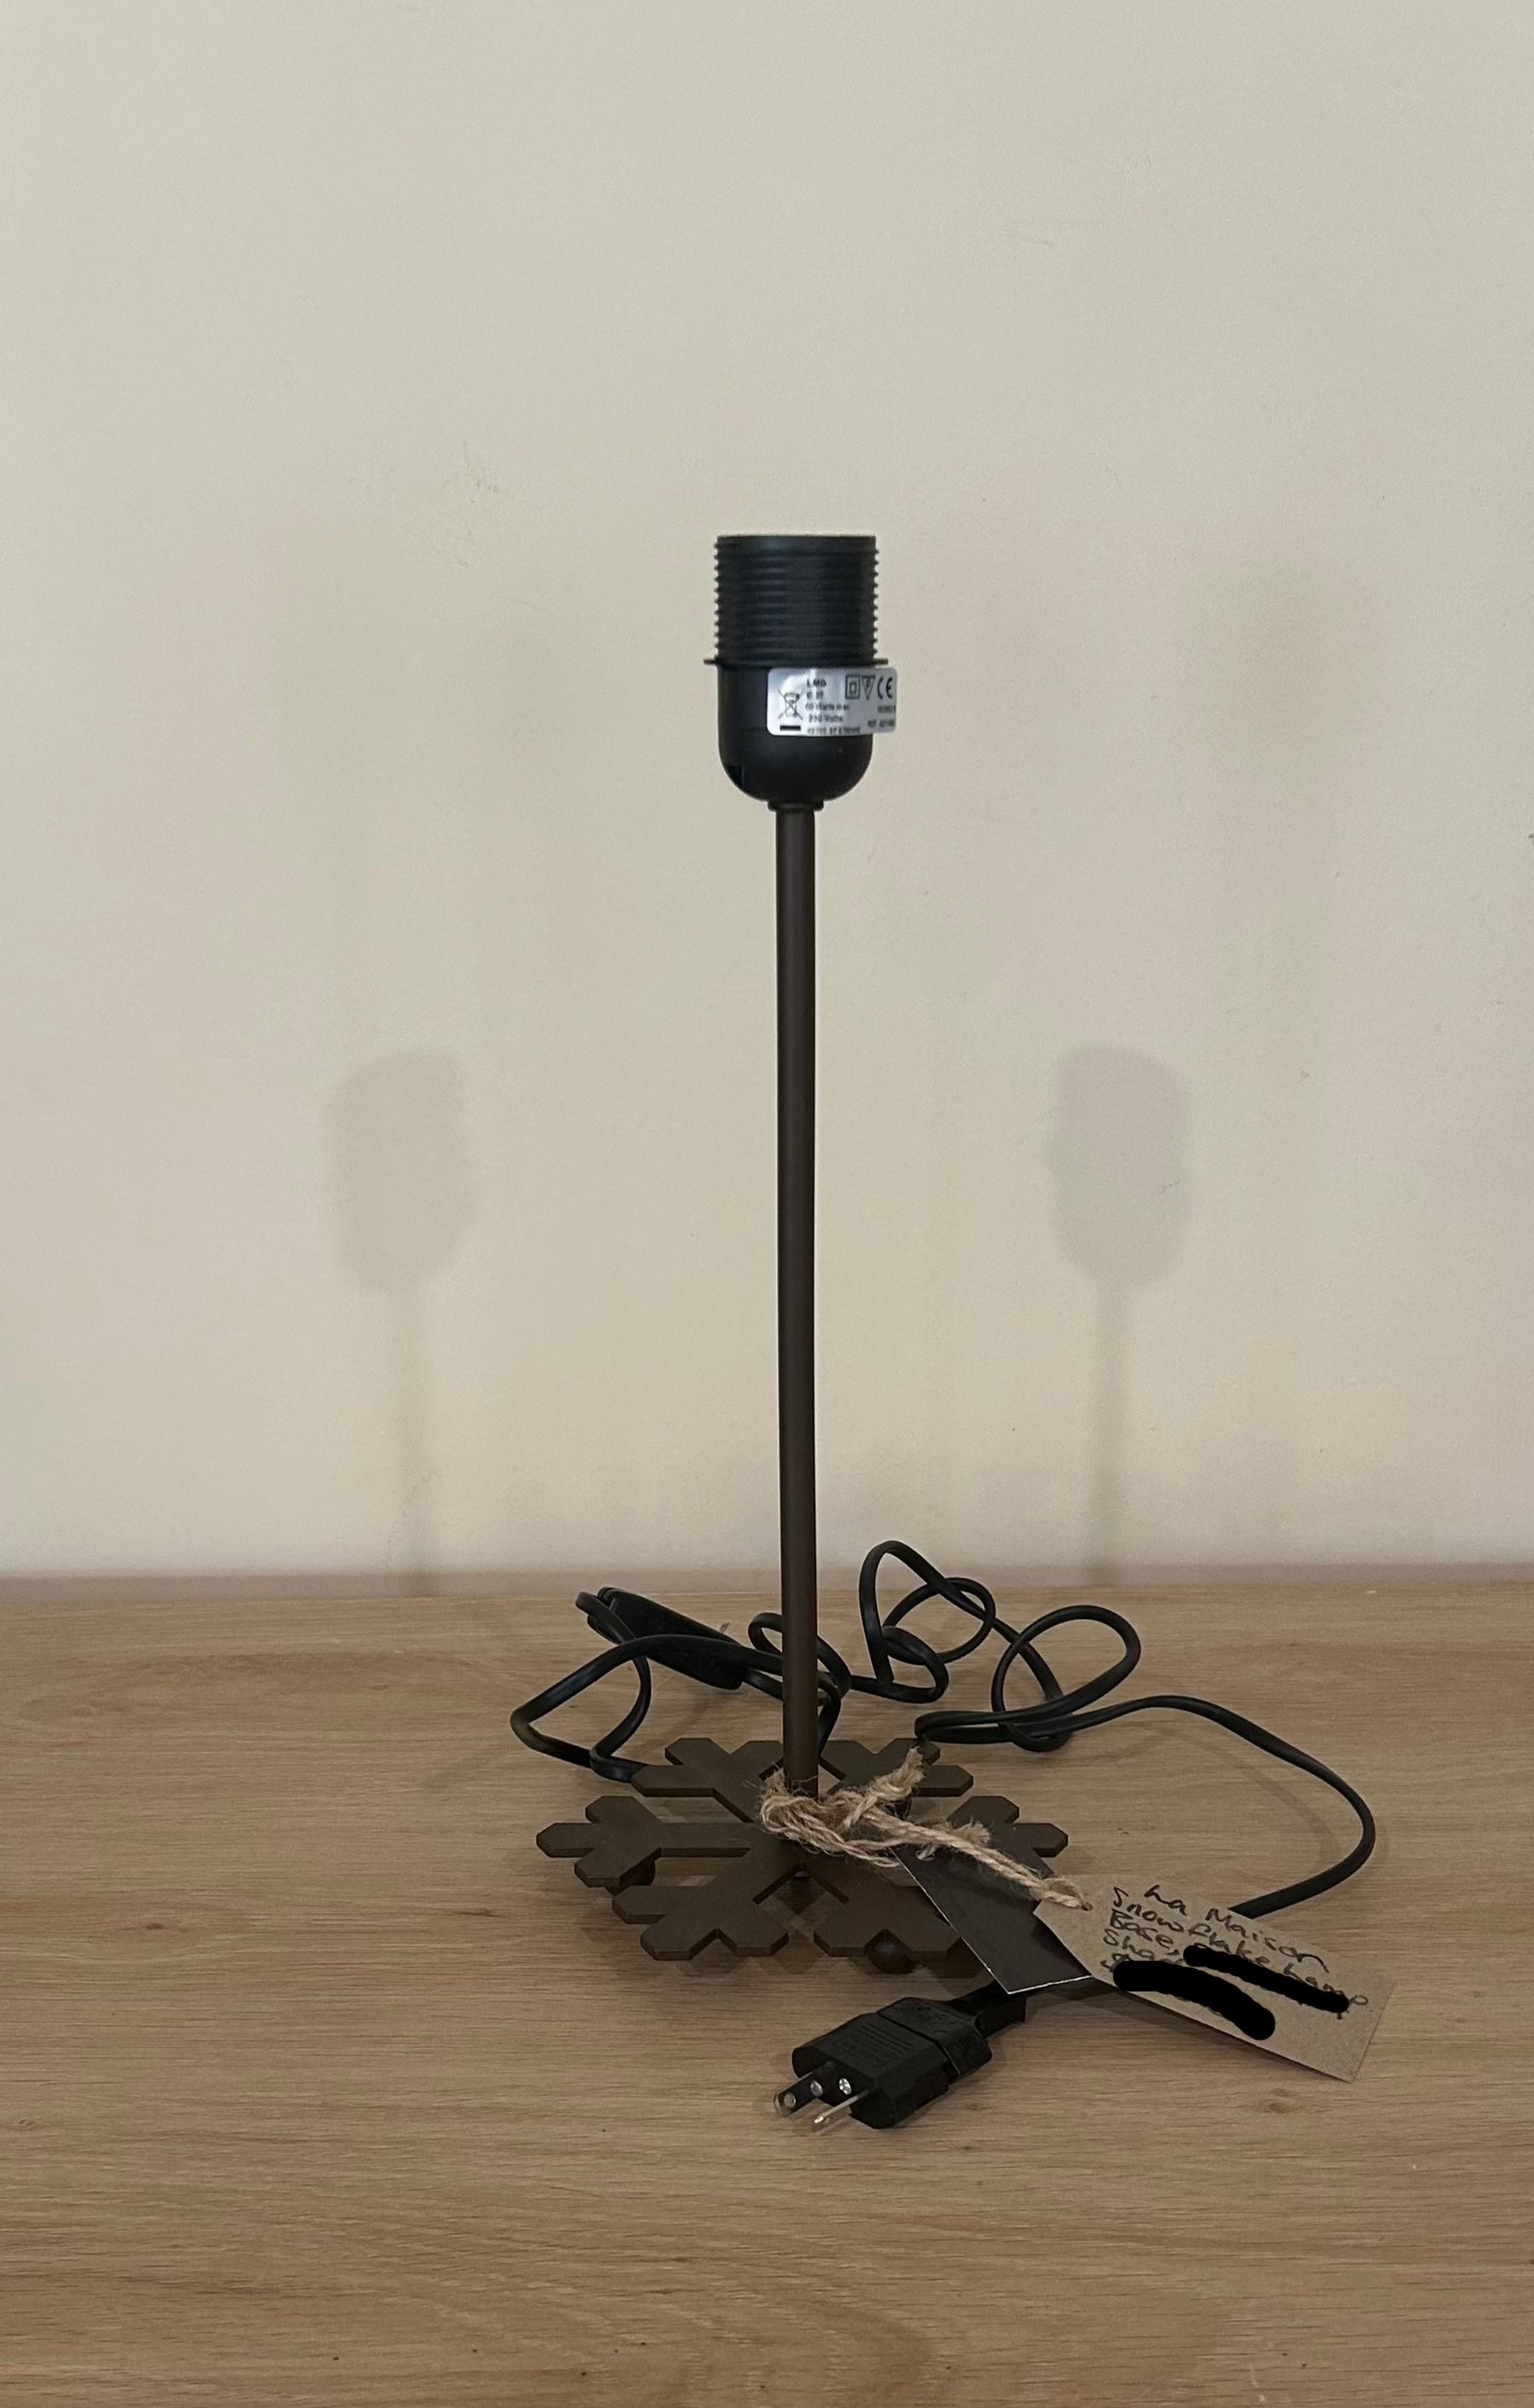 La Maison De Gaspard Snowflake metal lamp with the snowflake forming the base of the lamp. On wooden table top